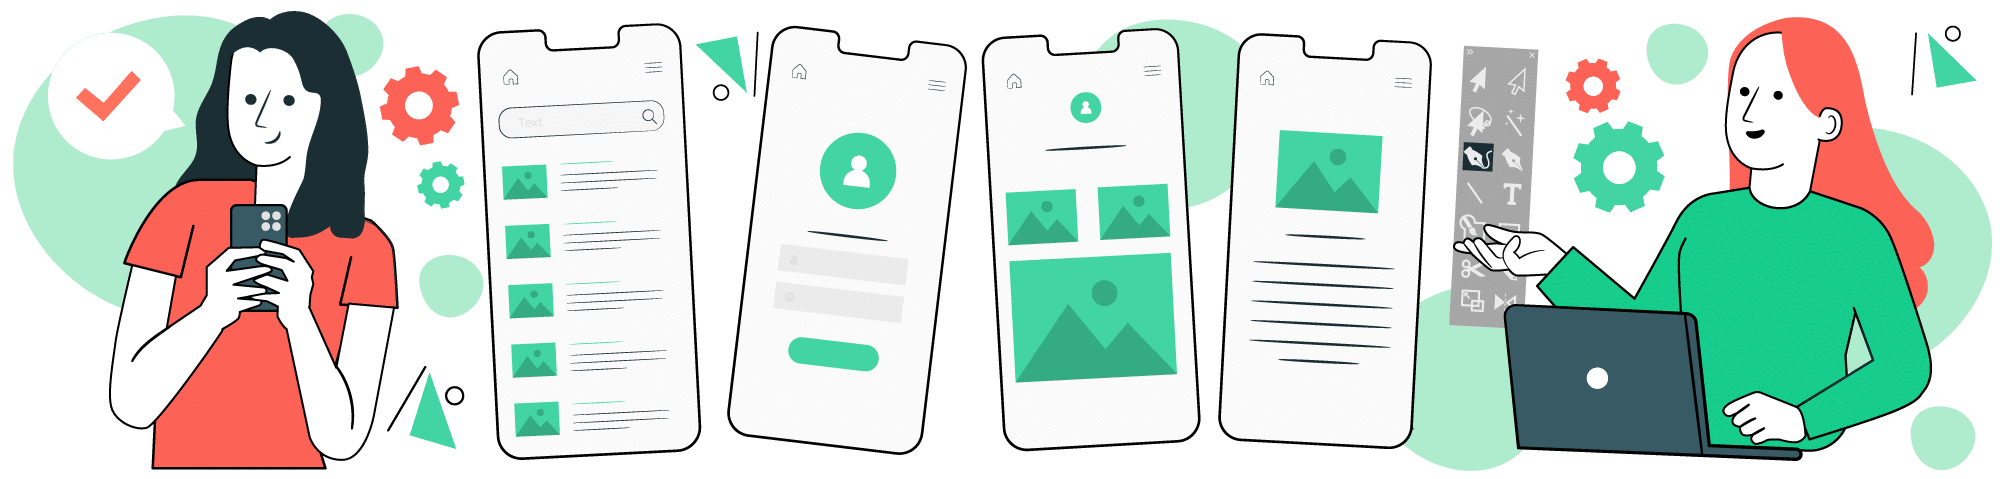 Your Guide To Getting Amazing App Design